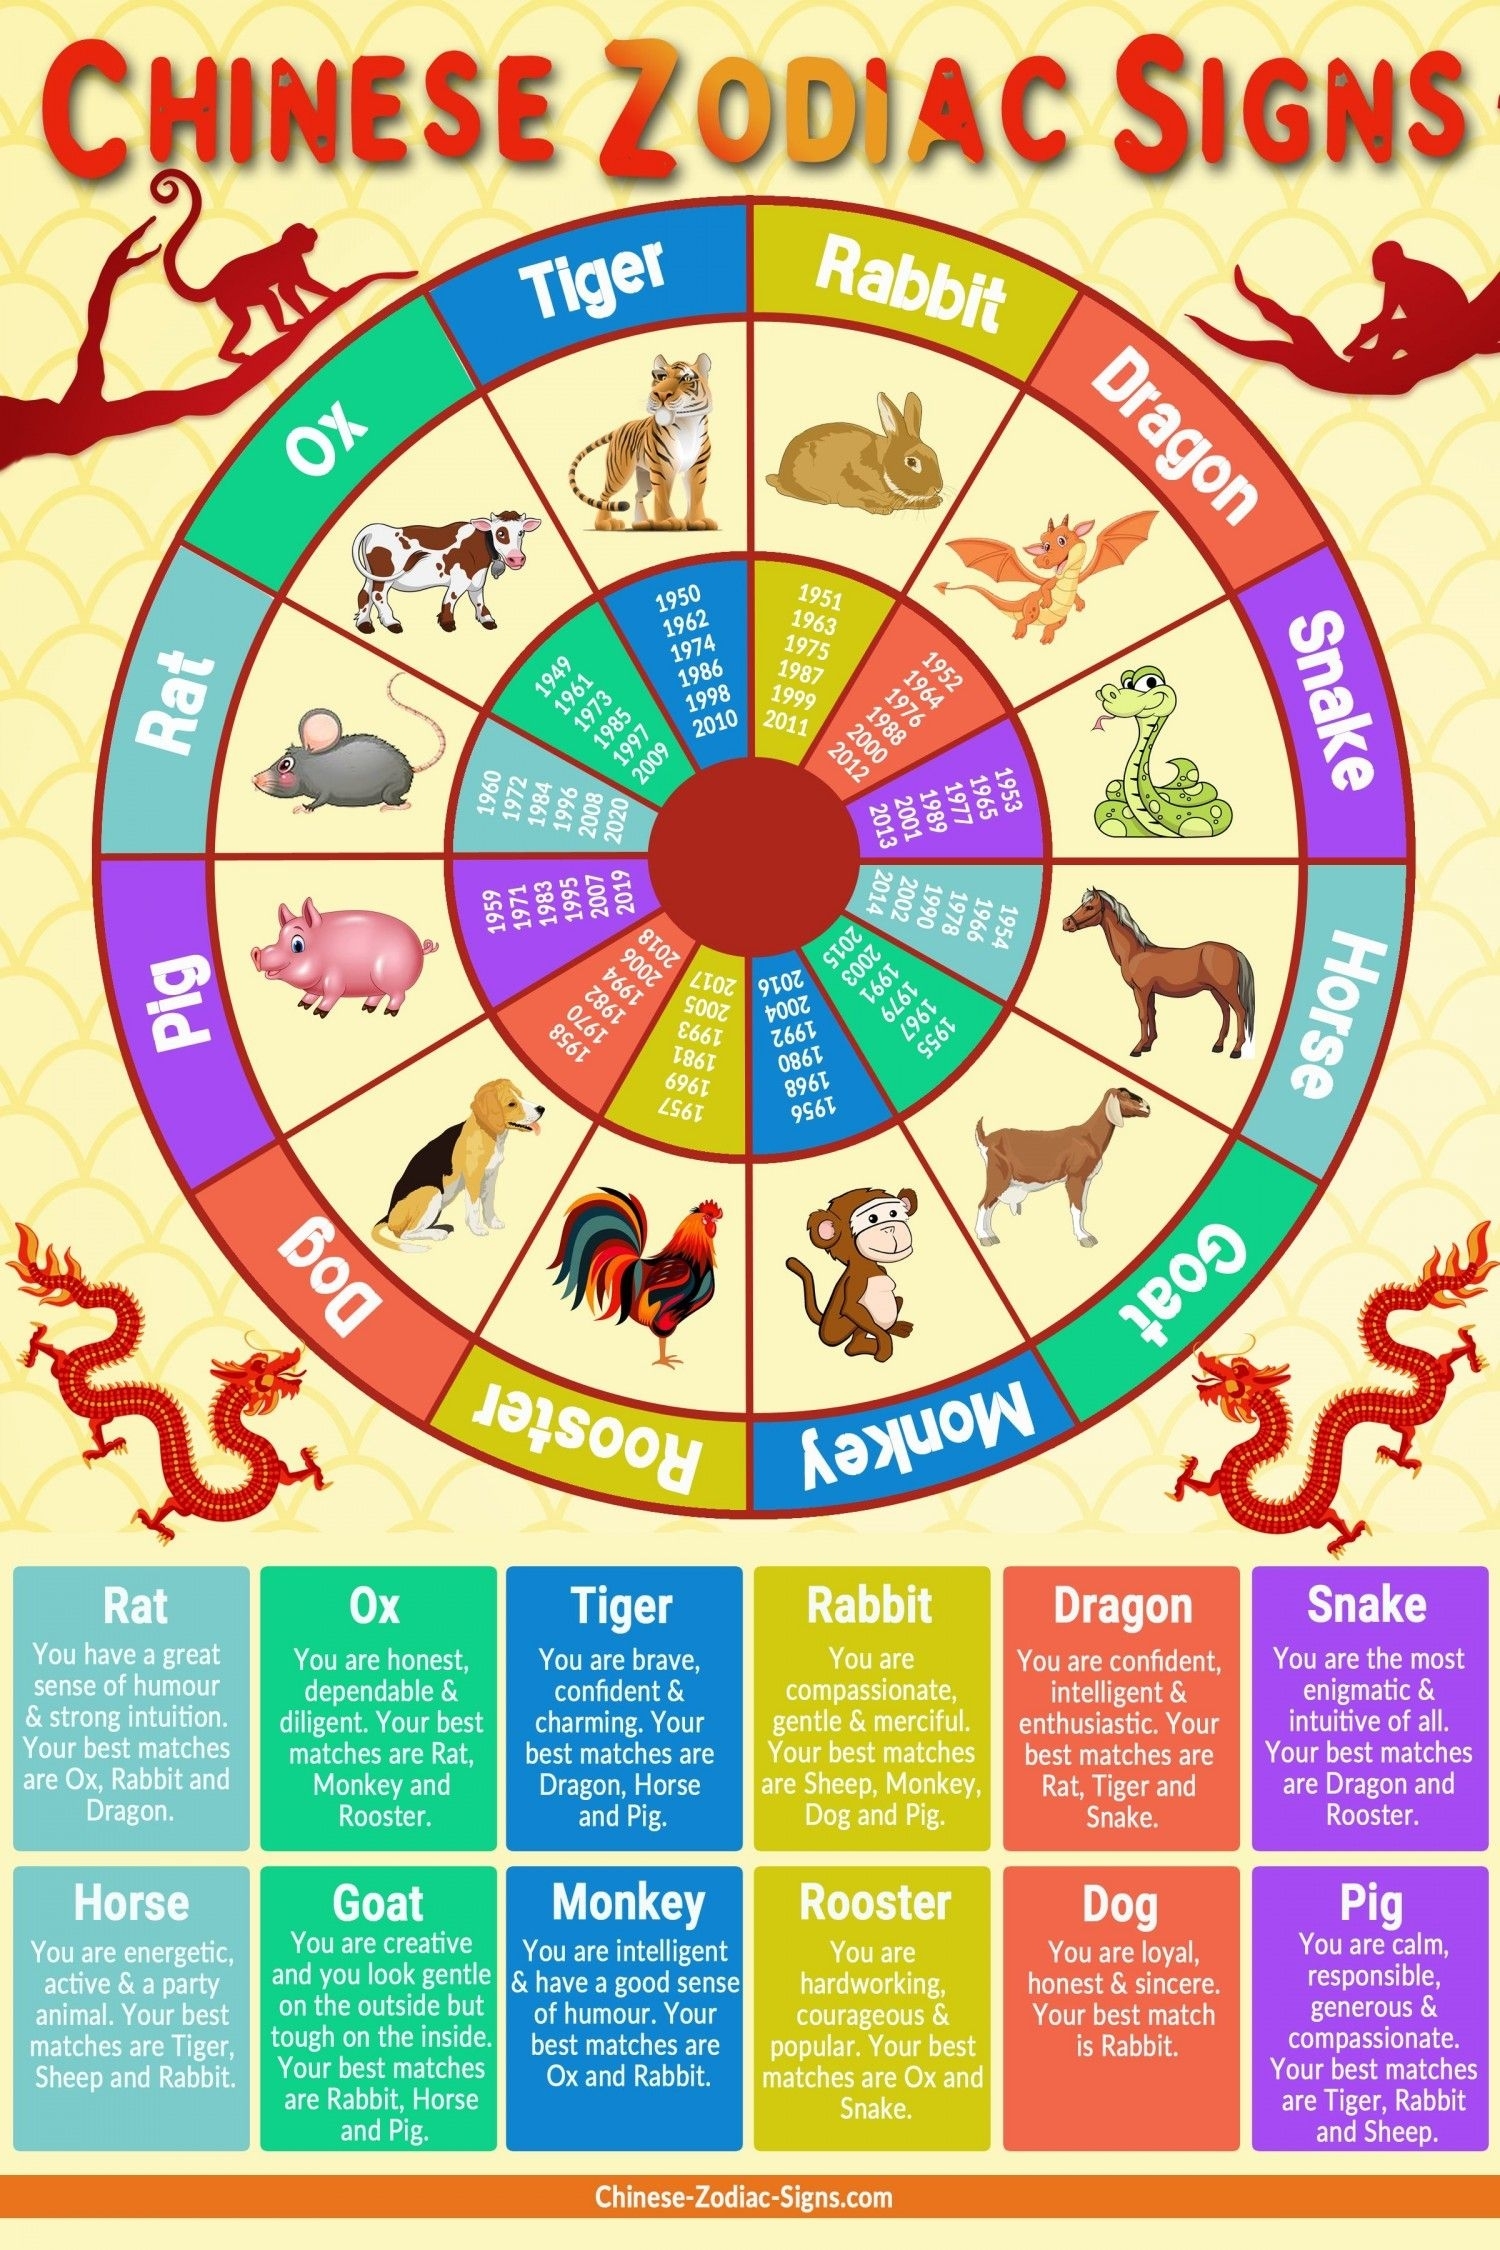 Chinese Zodiac Signs Infographic In 2019 | Chinese Zodiac